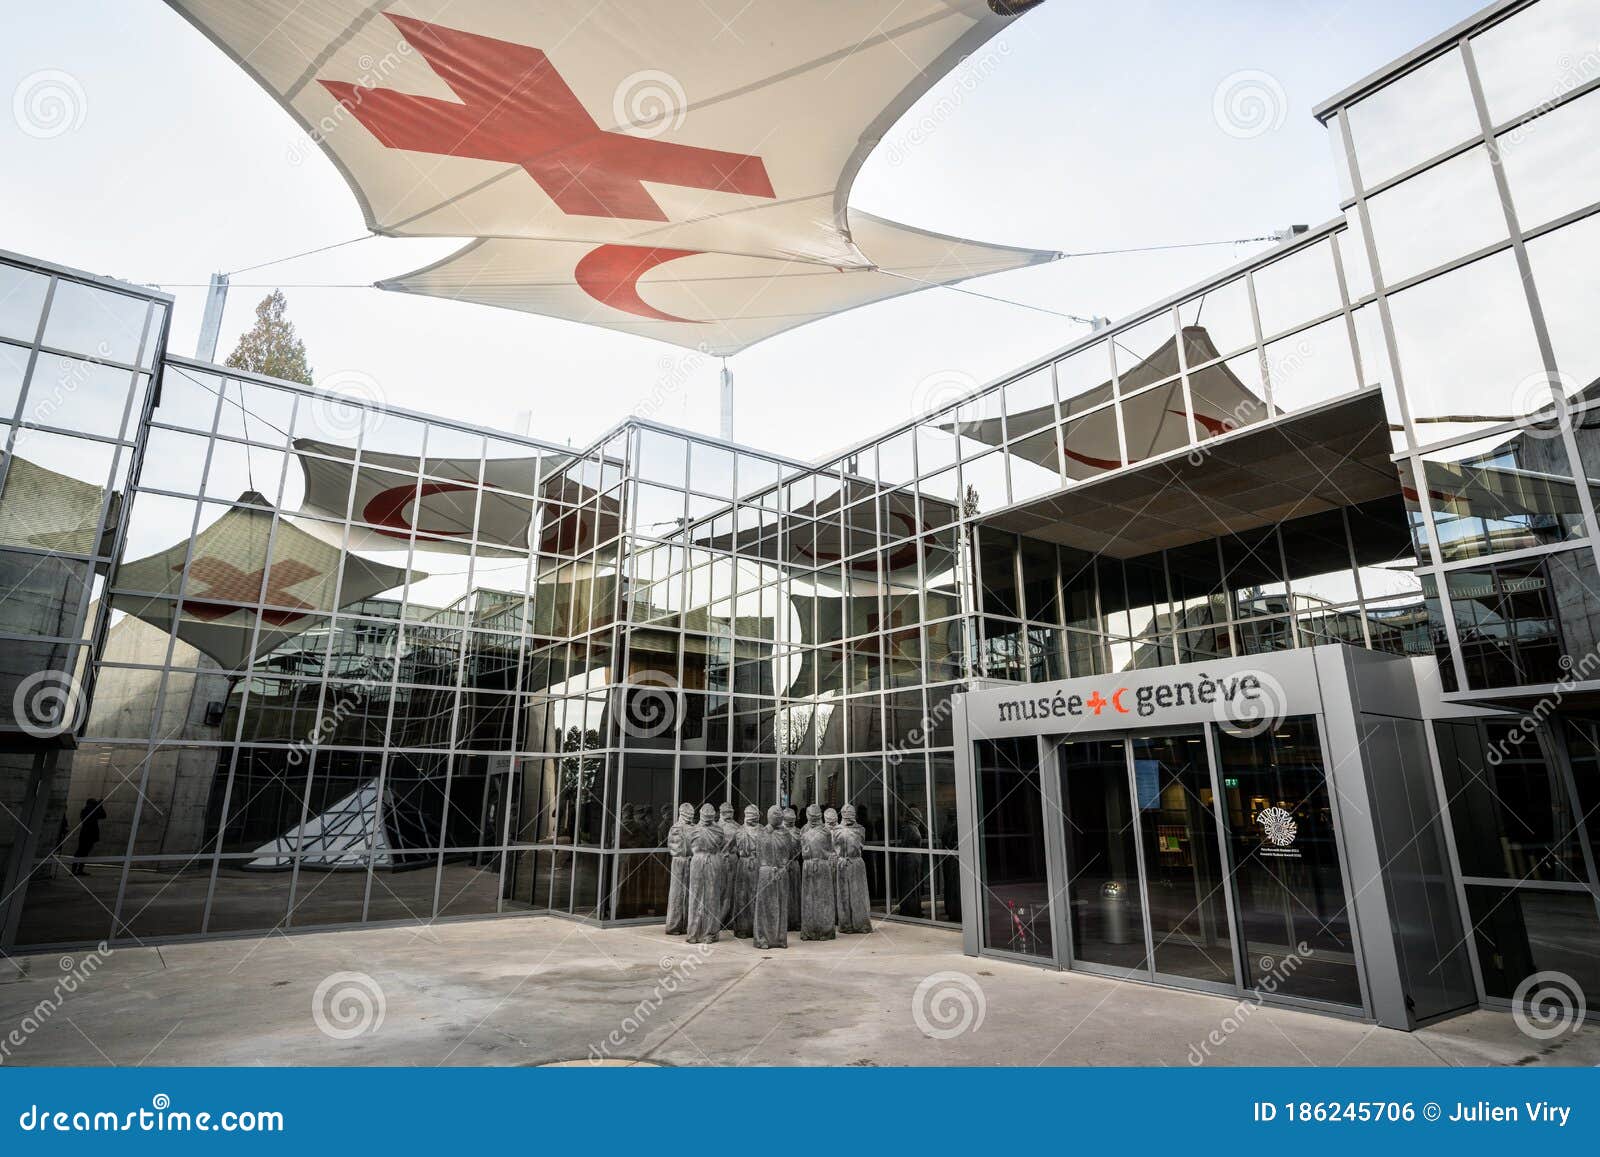 Entrance of International Museum of the Red Cross Red Crescent in Switzerland with Logo Editorial Photo - Image of switzerland: 186245706